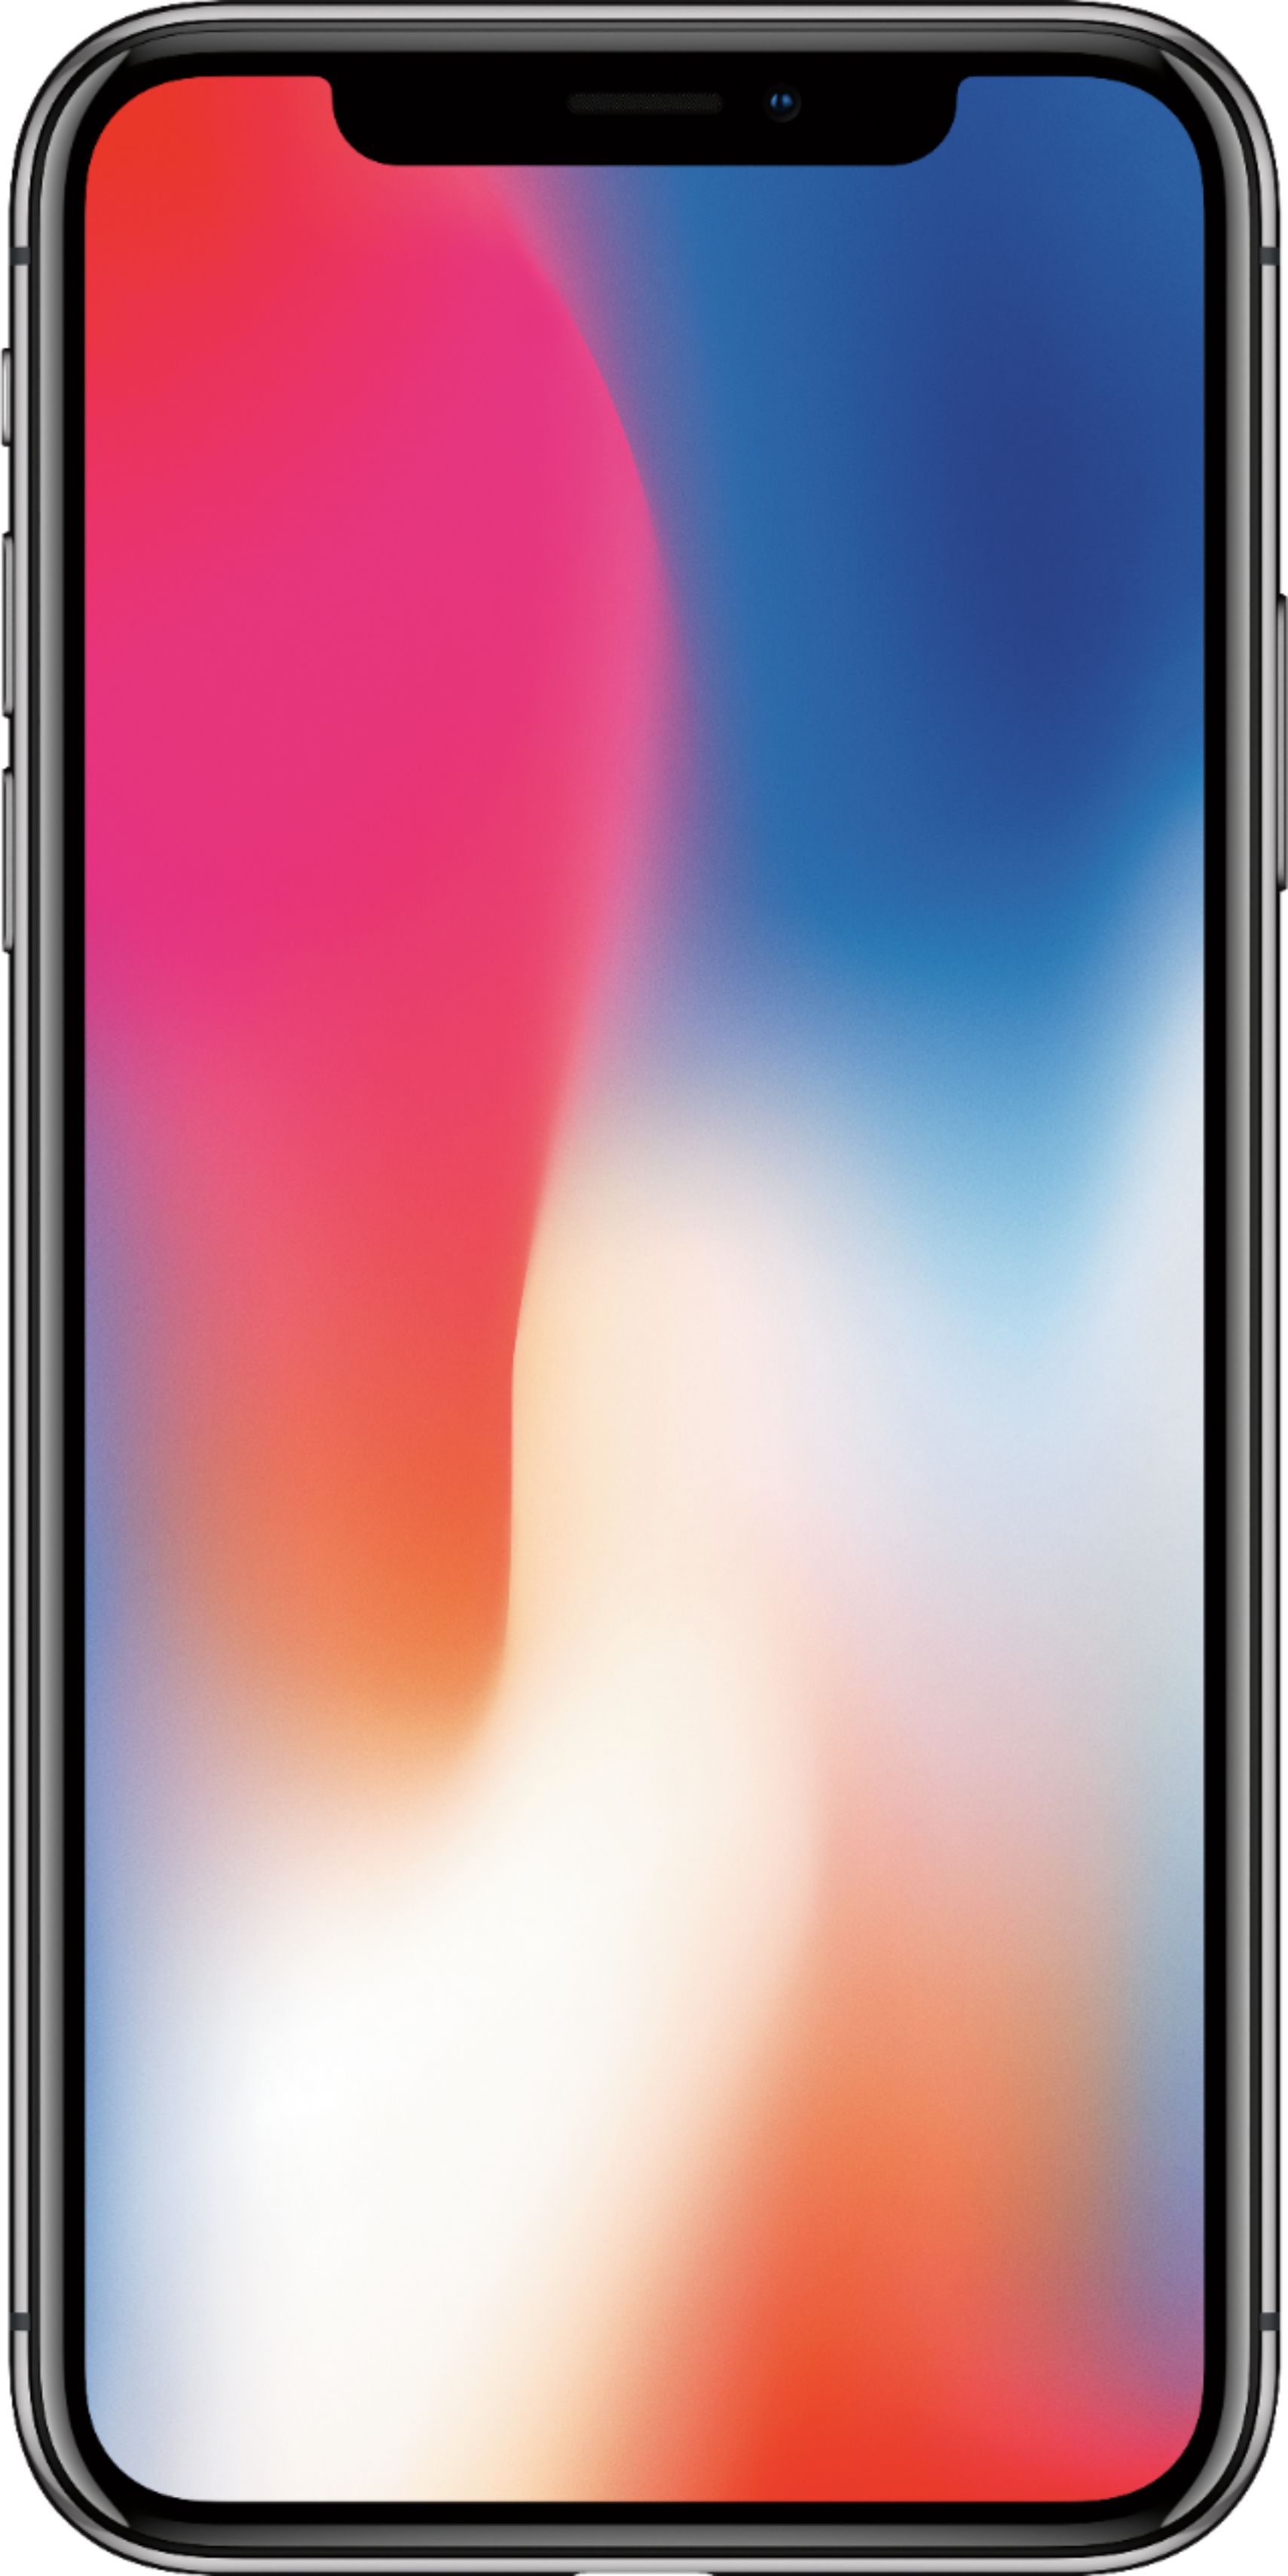 Apple iPhone X 64GB Space Gray (AT&T) MQA52LL/A - Best Buy